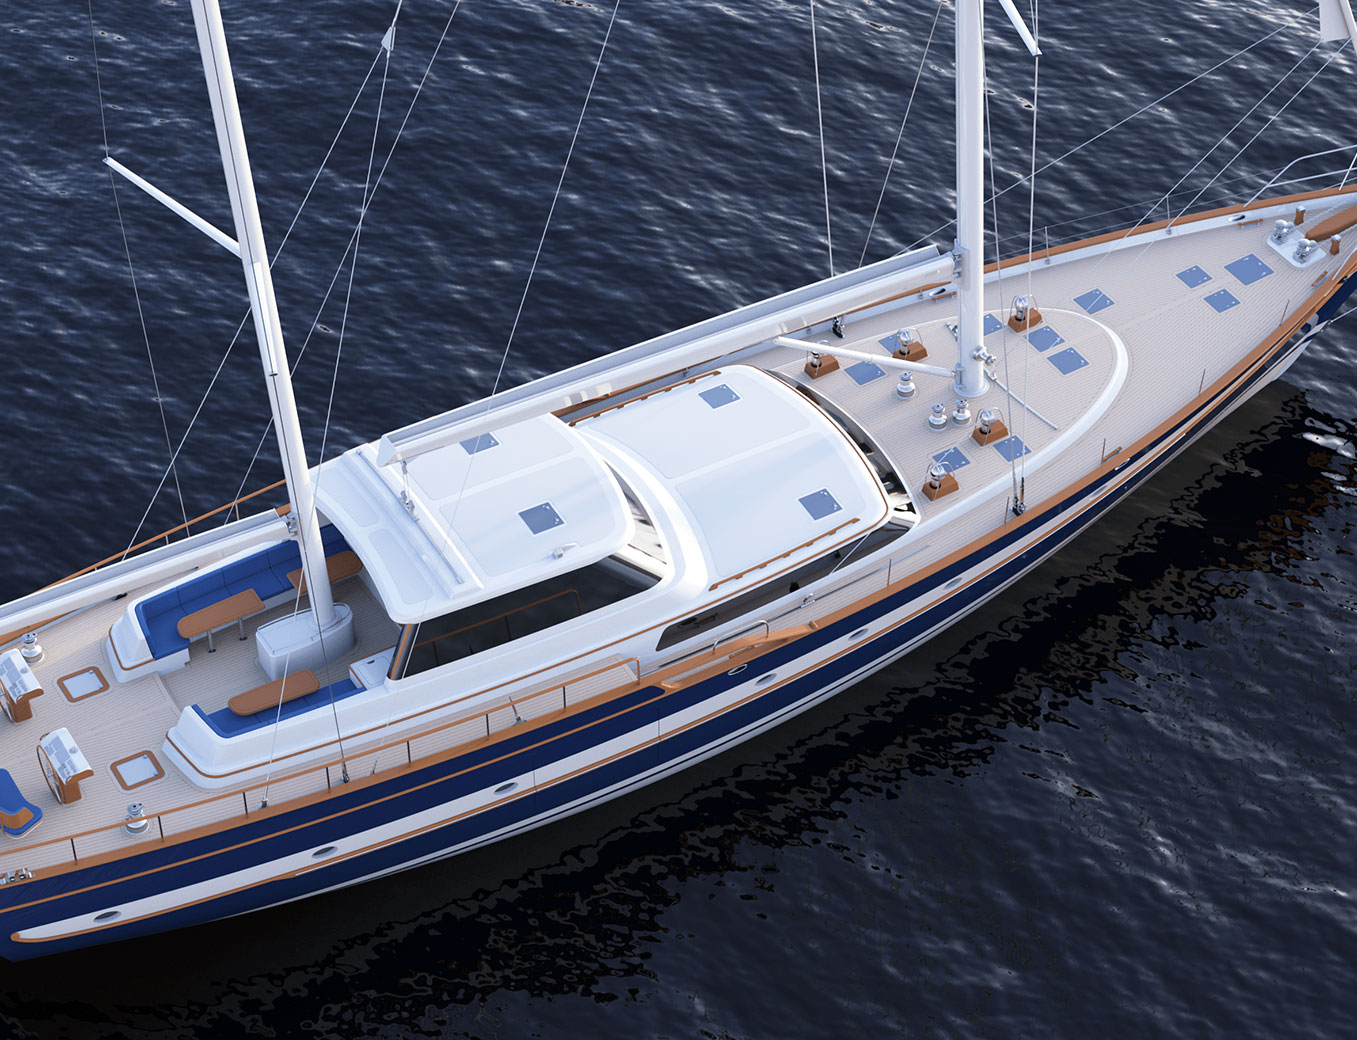 3D animation Acclaim designed for a new model of a yacht.